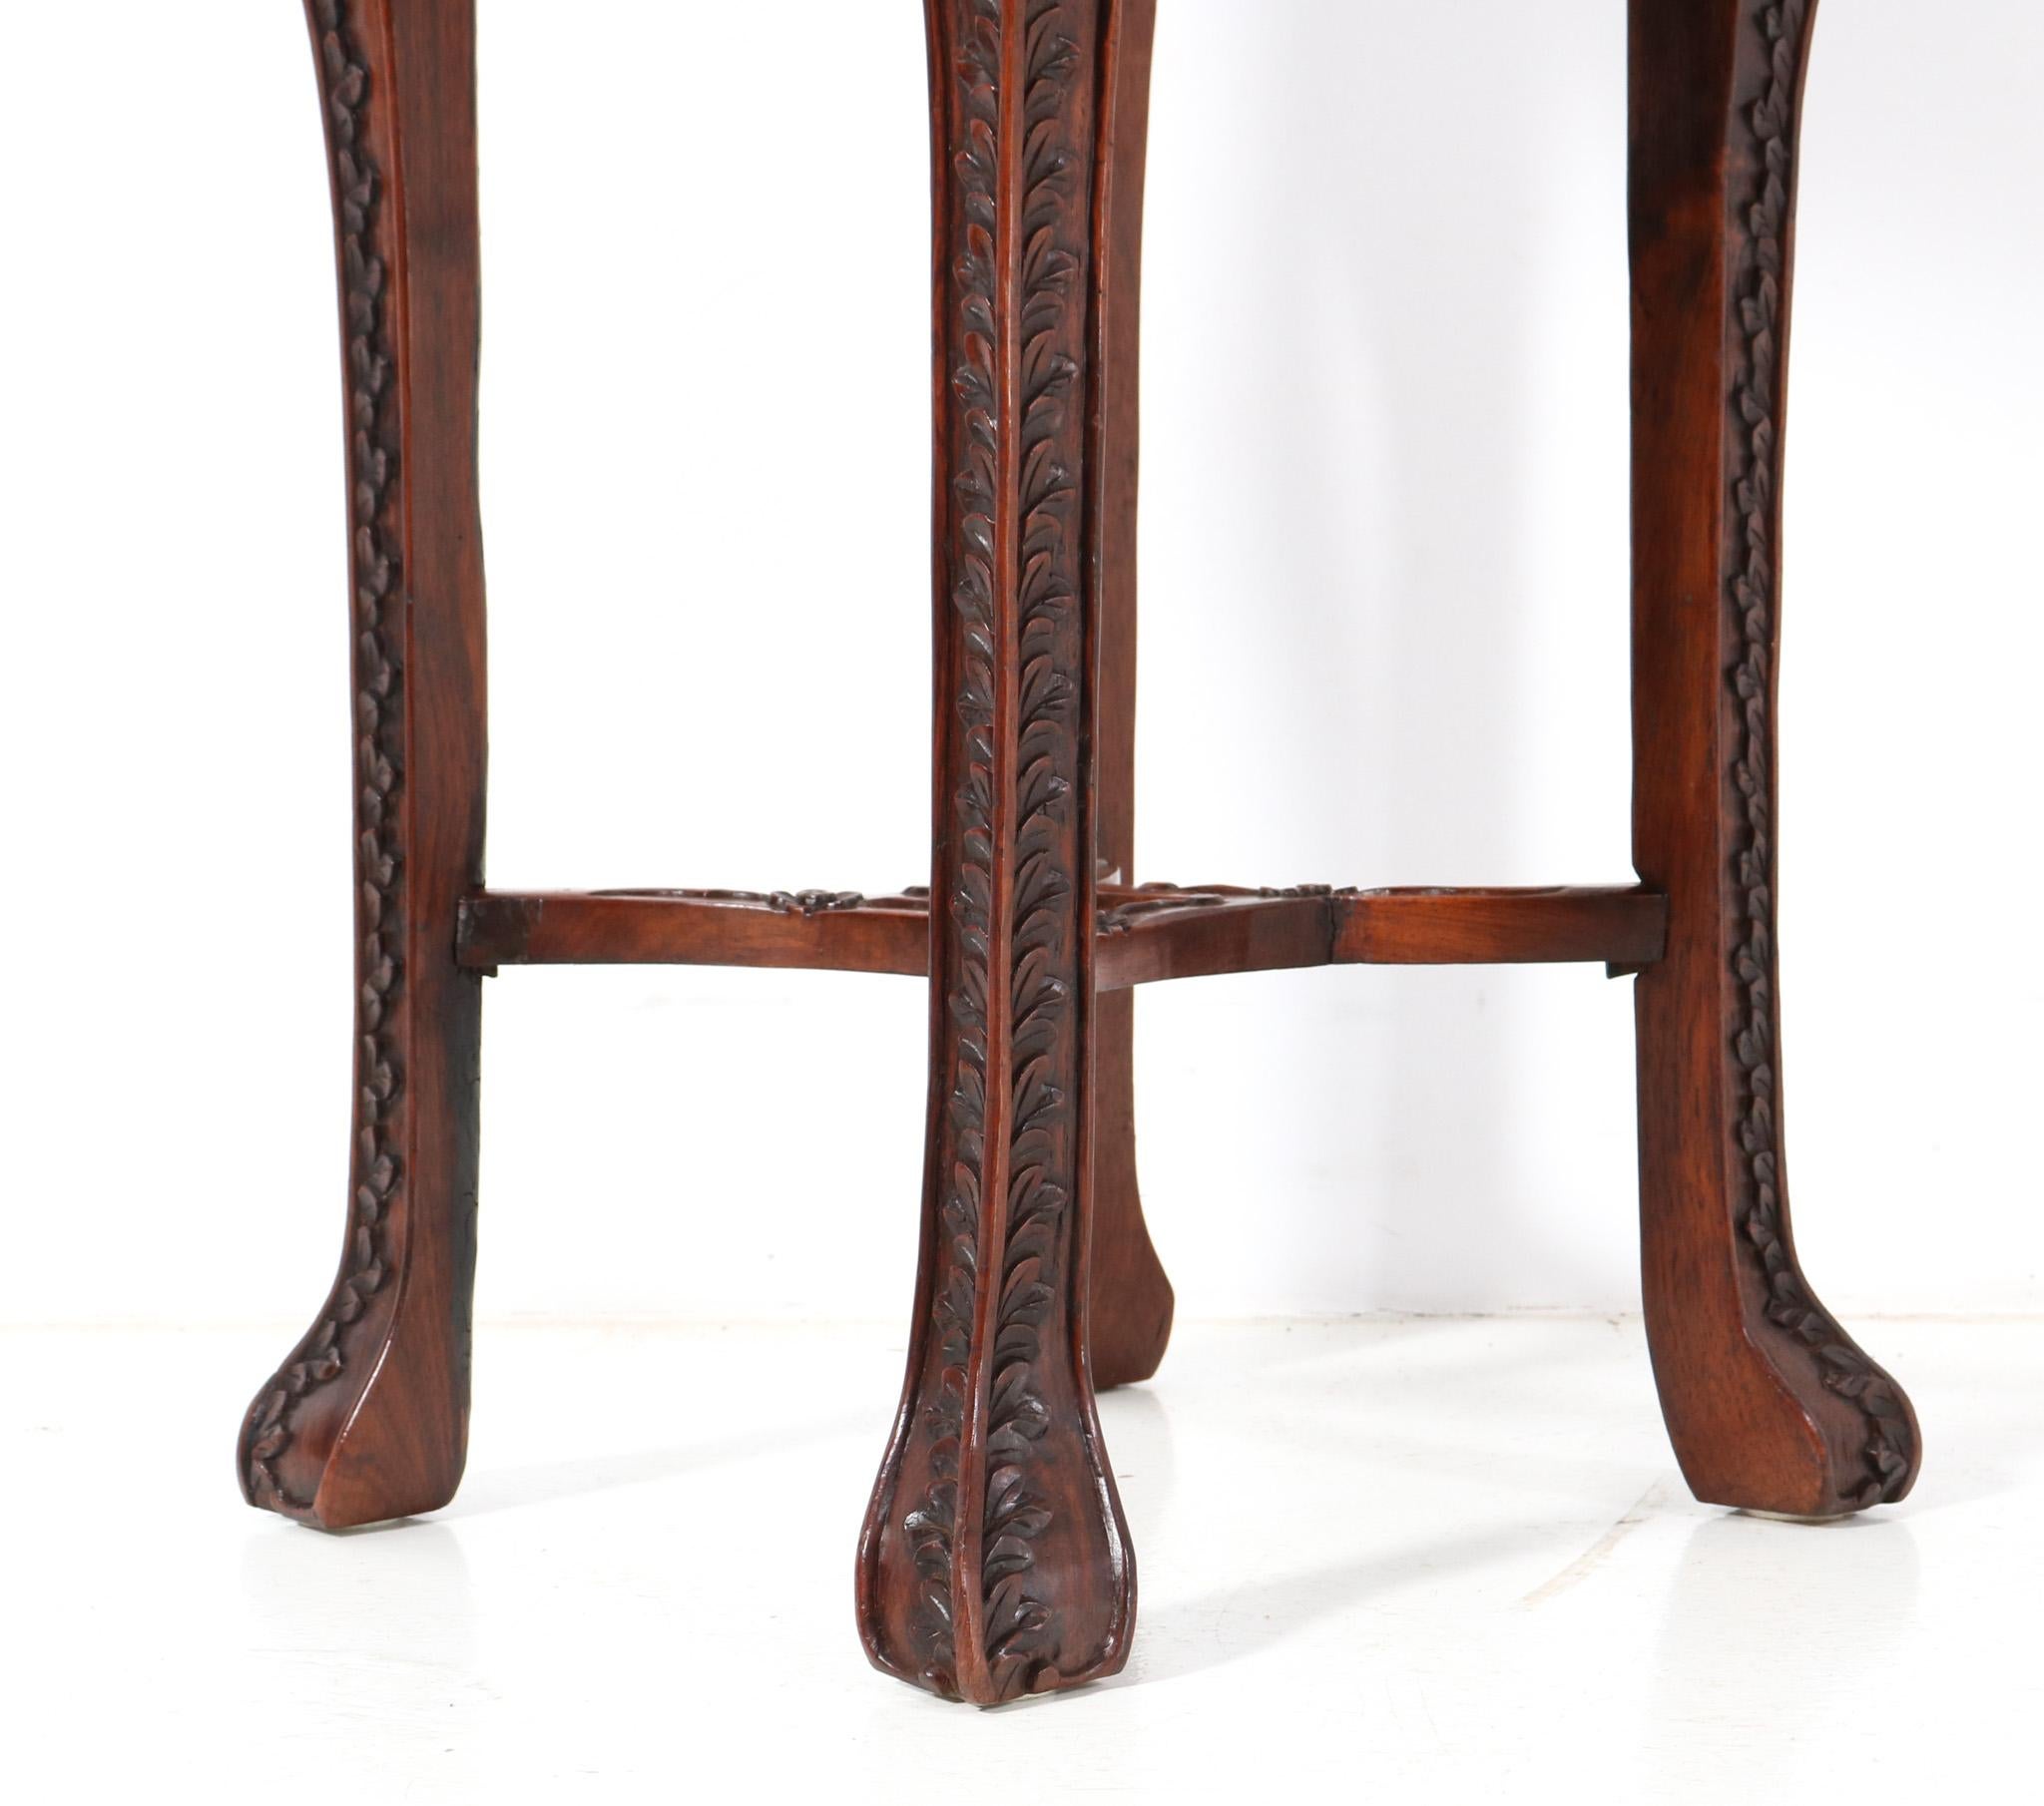 Hardwood Chinese Carved Pedestal Table with Marble Top, 1920s For Sale 2